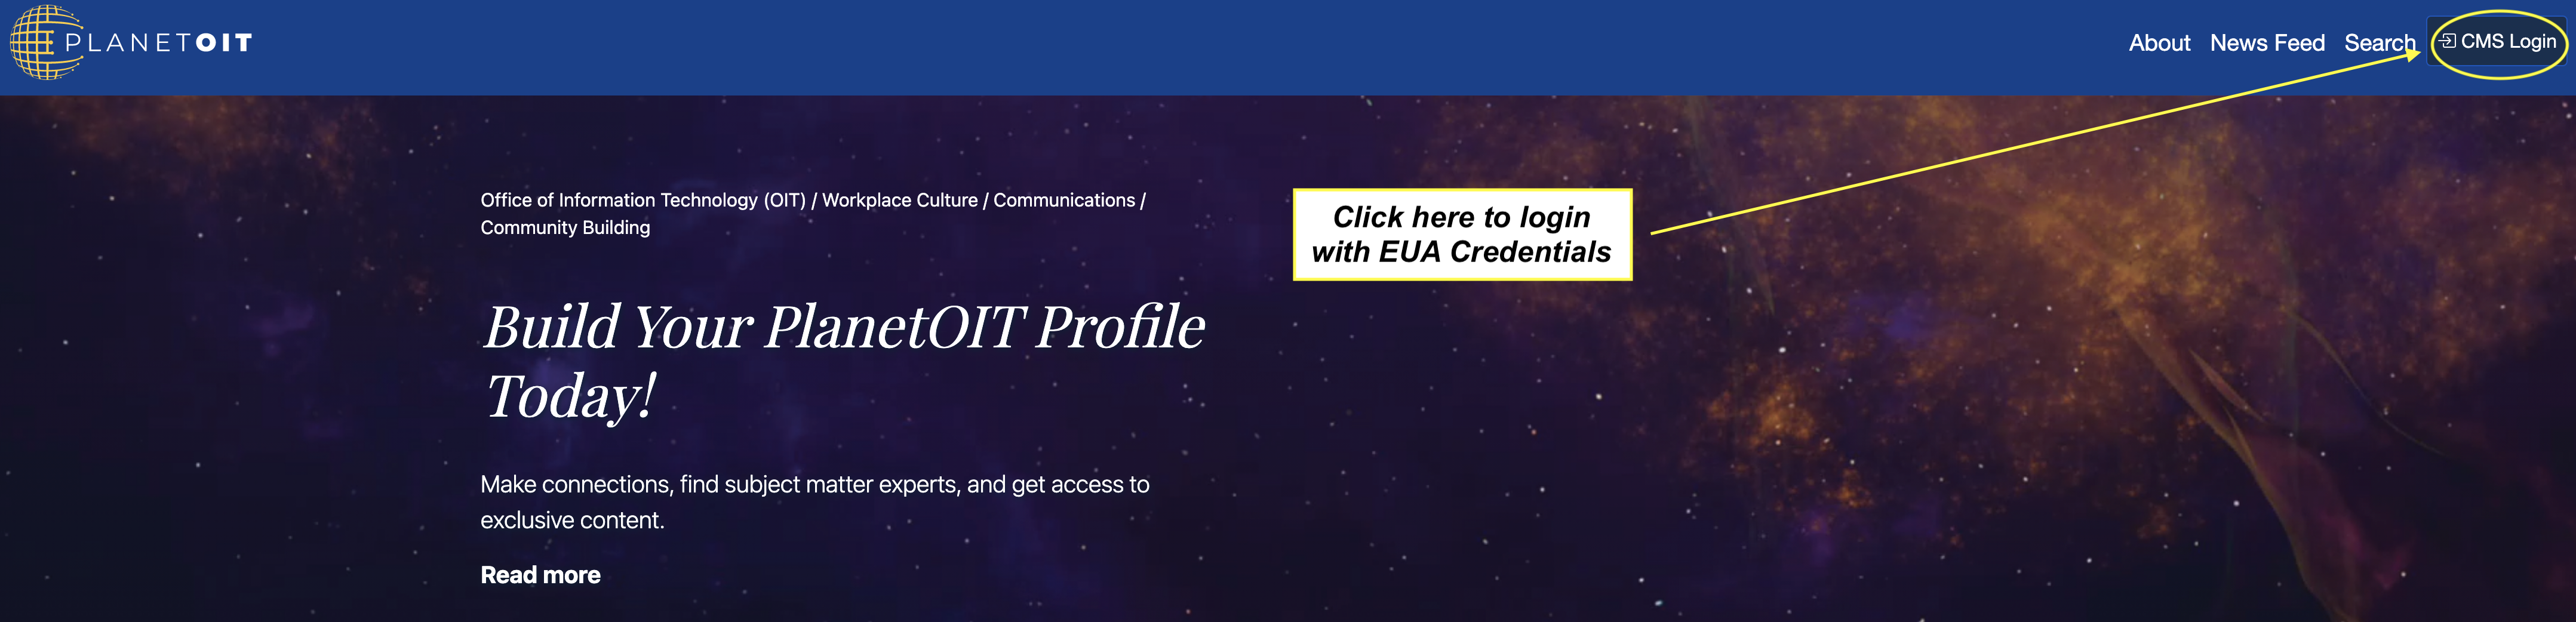 Image of PlanetOIT website homepage with arrow pointing to CMS login button at upper right corner of page with text "Click here to login with EUA credentials."